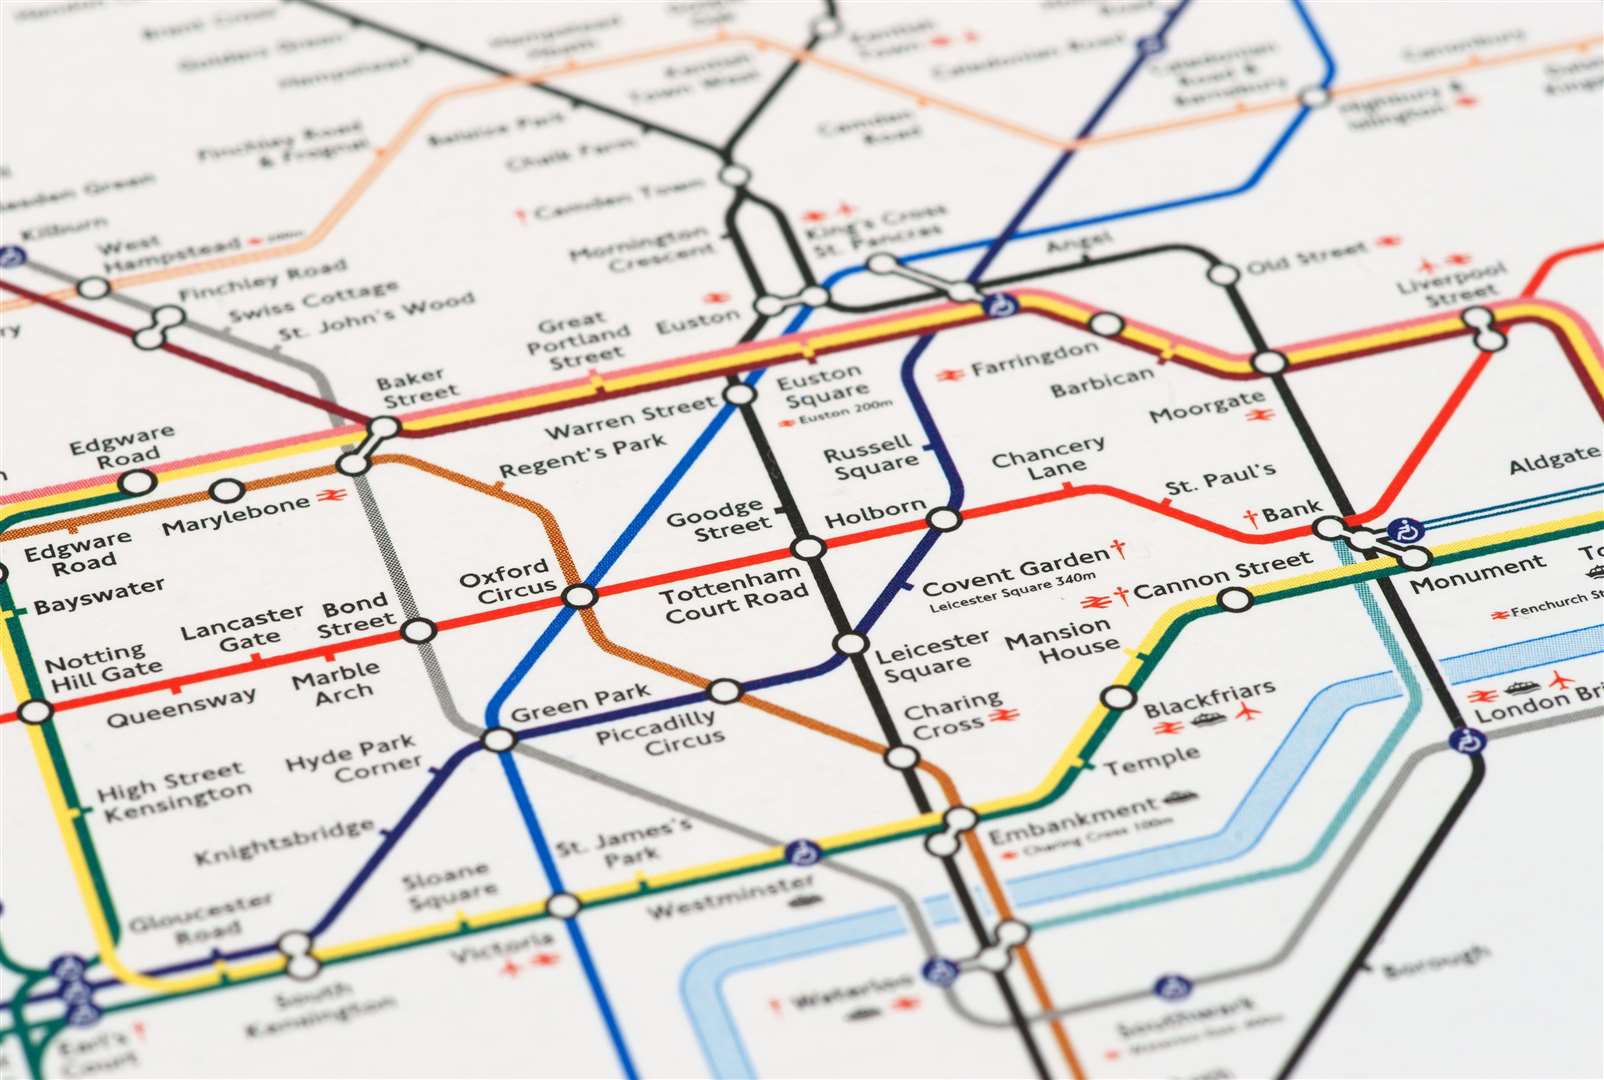 Depending on which zones passengers travel in, they could pay up to £14 for London travel. Image: iStock.